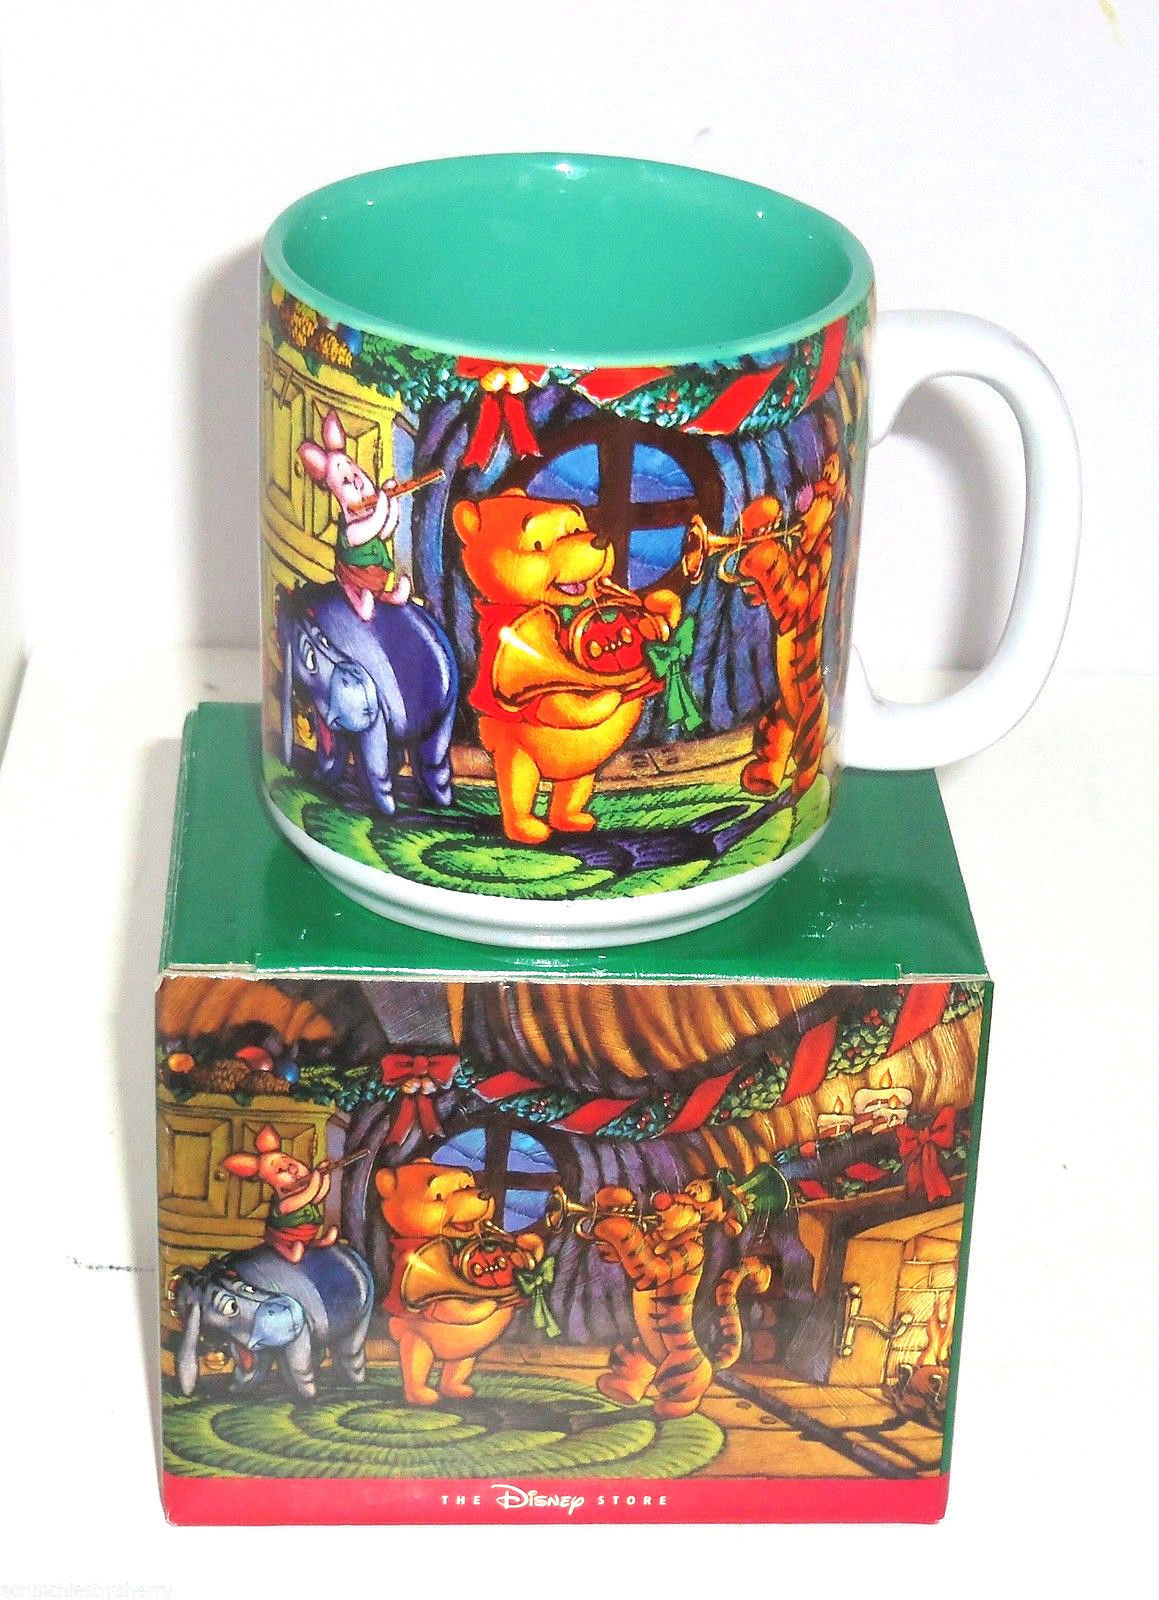 Primary image for Disney Store Pooh Coffee Mug Season of Song Boxed 1997 Vintage in Box